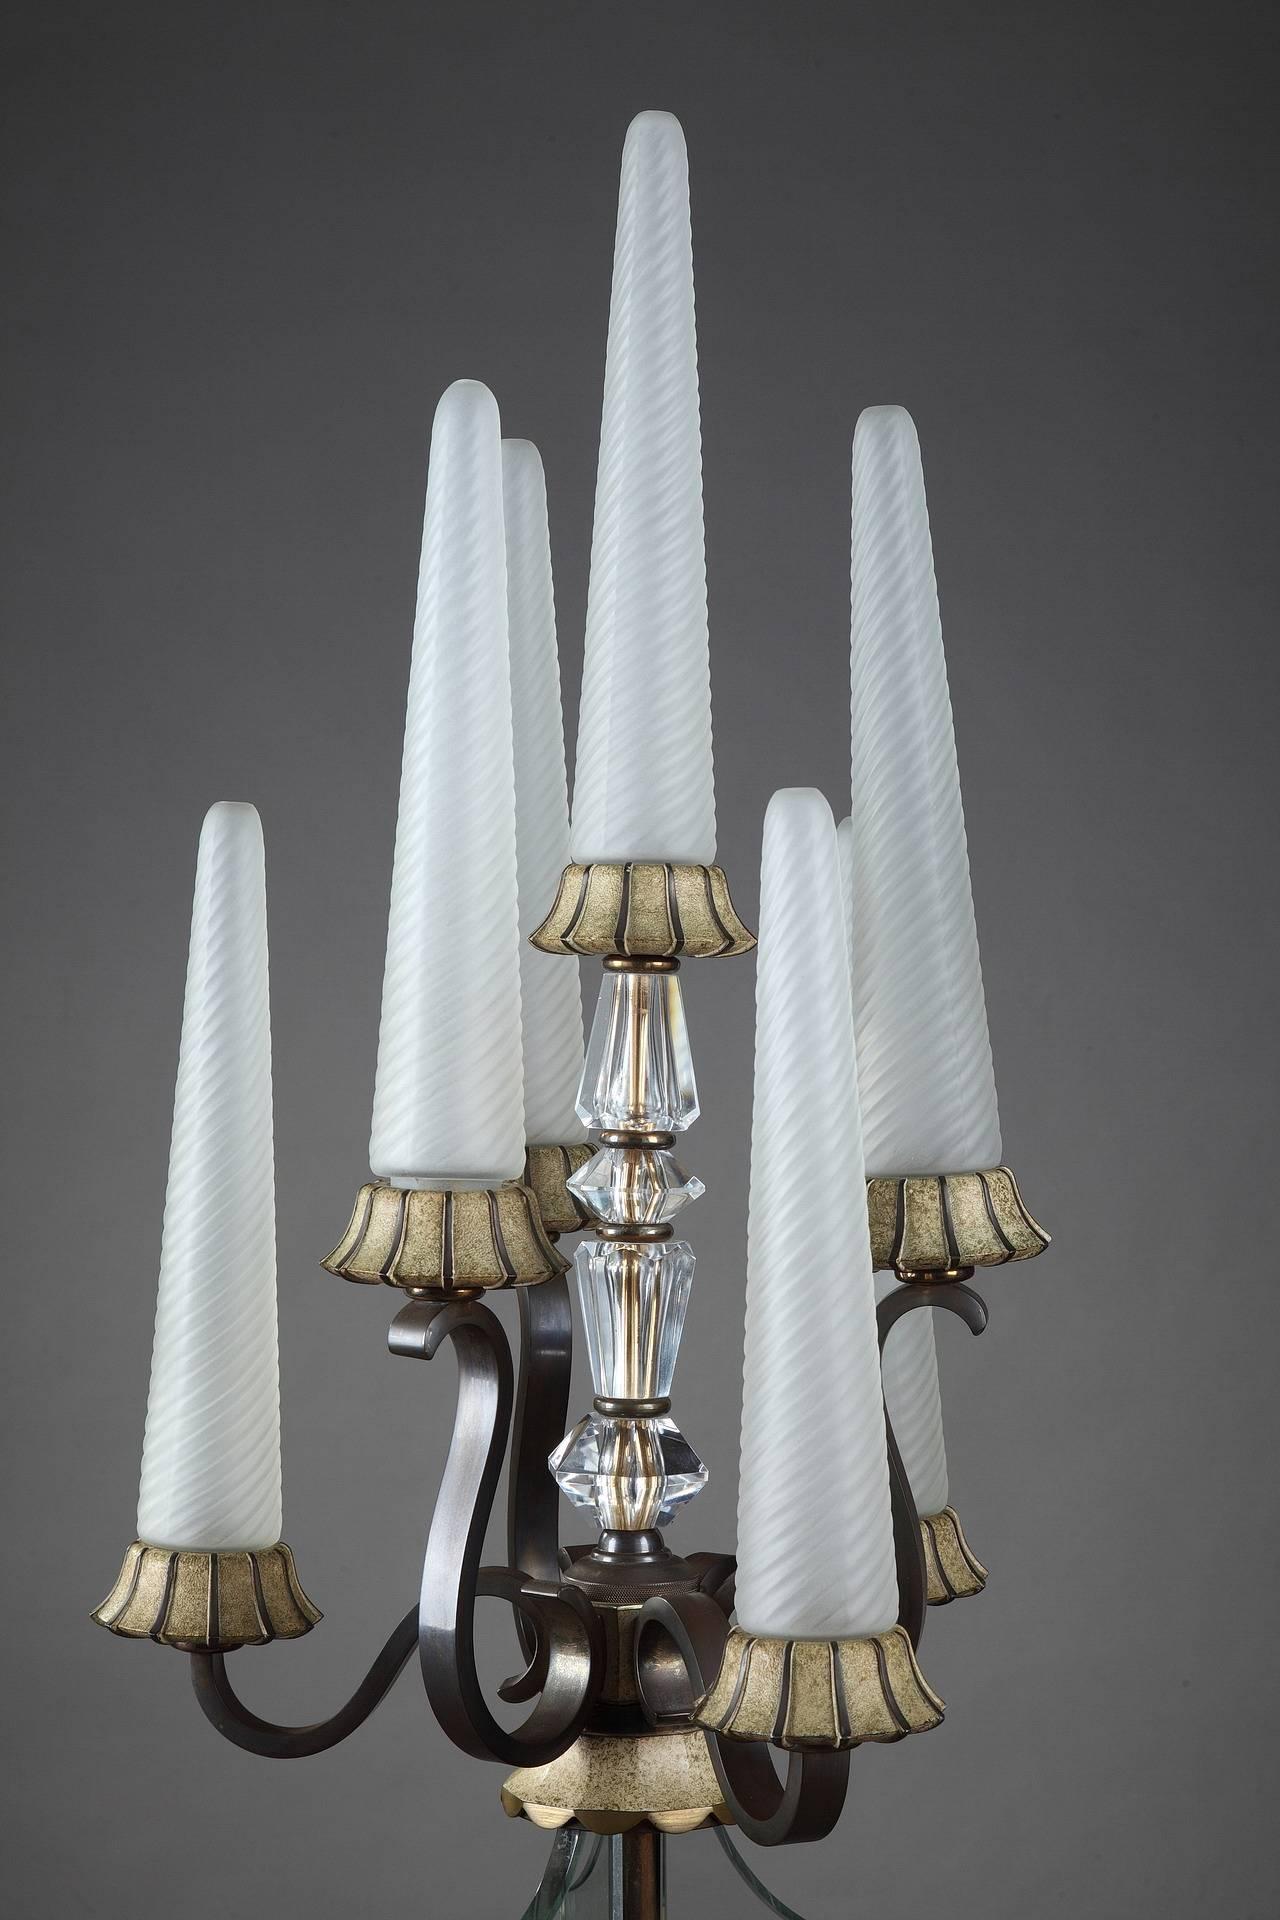 Exquisit lacquered bronze lampstand with seven twisted glass lights, resting on a high stem in Sevres crystal. Marked crystal GARANTI SEVRES FRANCE. Very good vintage condition, 


circa 1940
Dimensions: W: 15.7 in - D: 15.7 in - H: 76.8